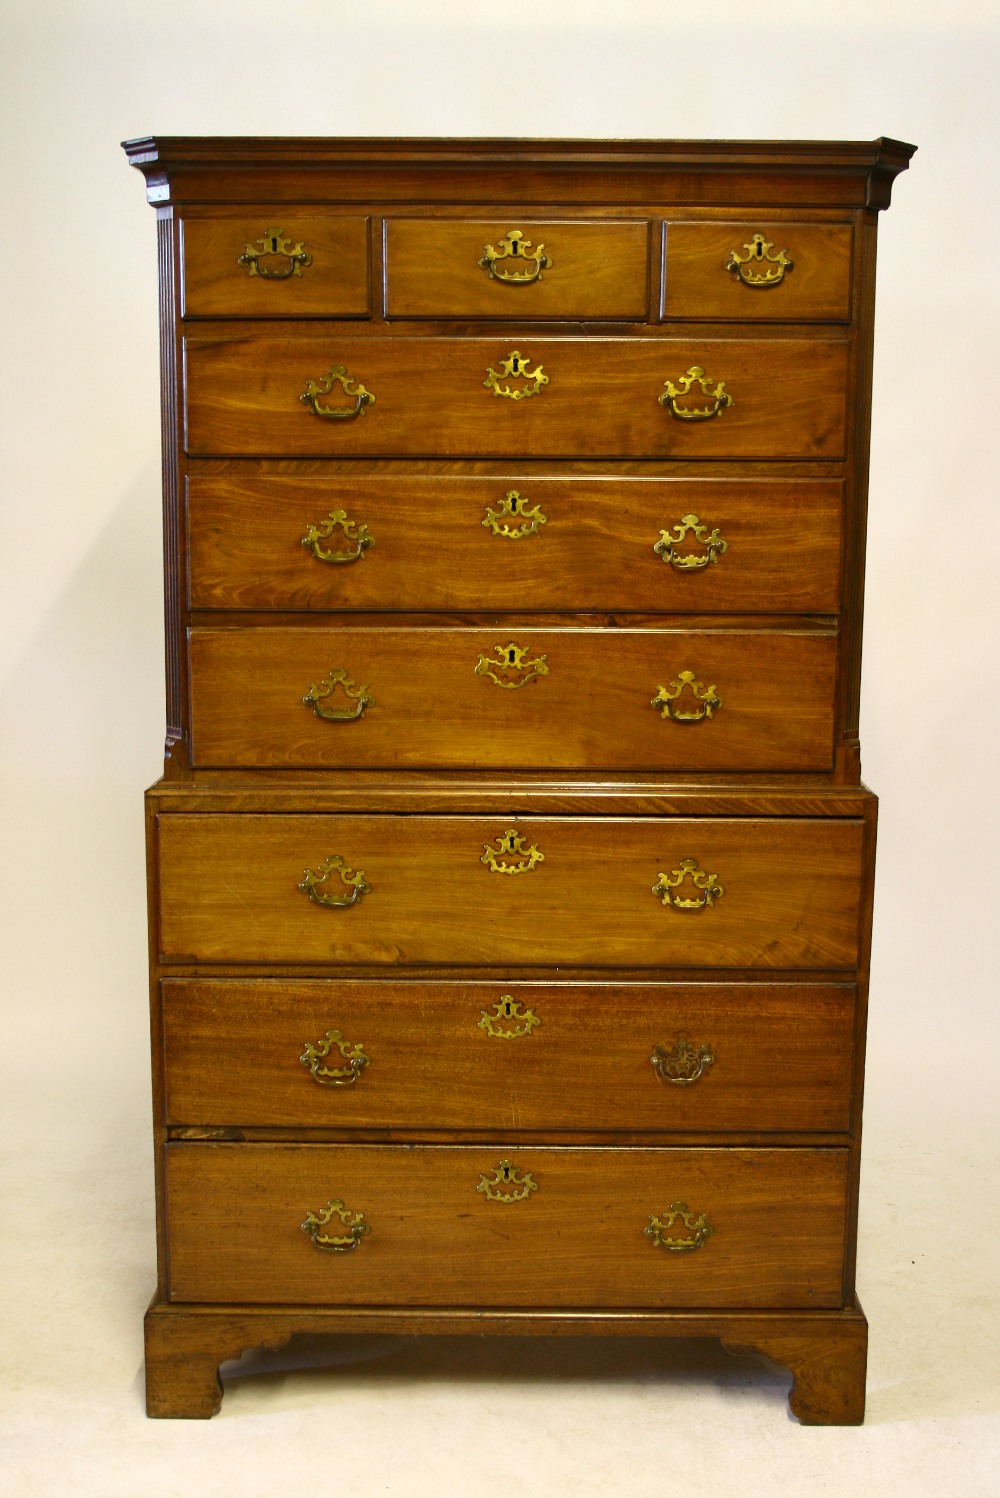 AN 18th century MAHOGANY CHEST-ON-CHEST, the upper part with moulded cornice & reeded canted